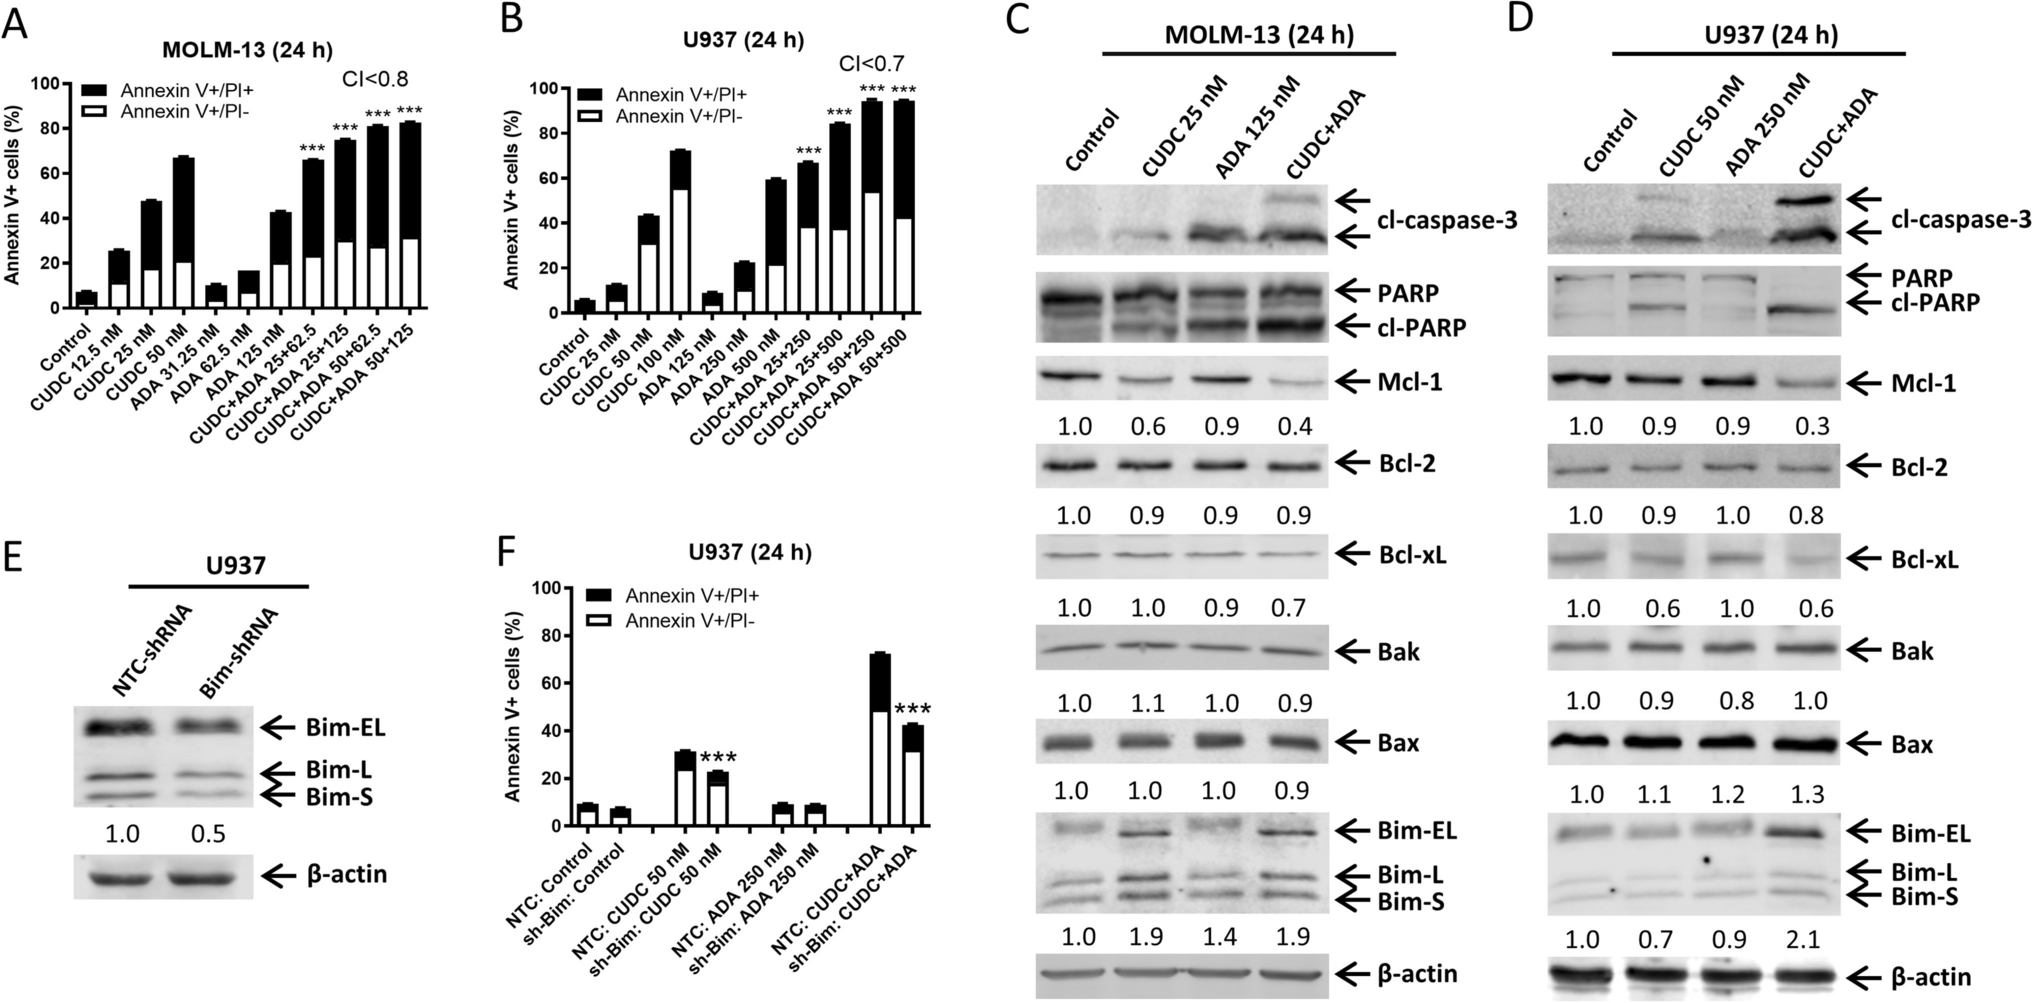 Synergistic effect of adavosertib and fimepinostat on acute myeloid leukemia cells by enhancing the induction of DNA damage